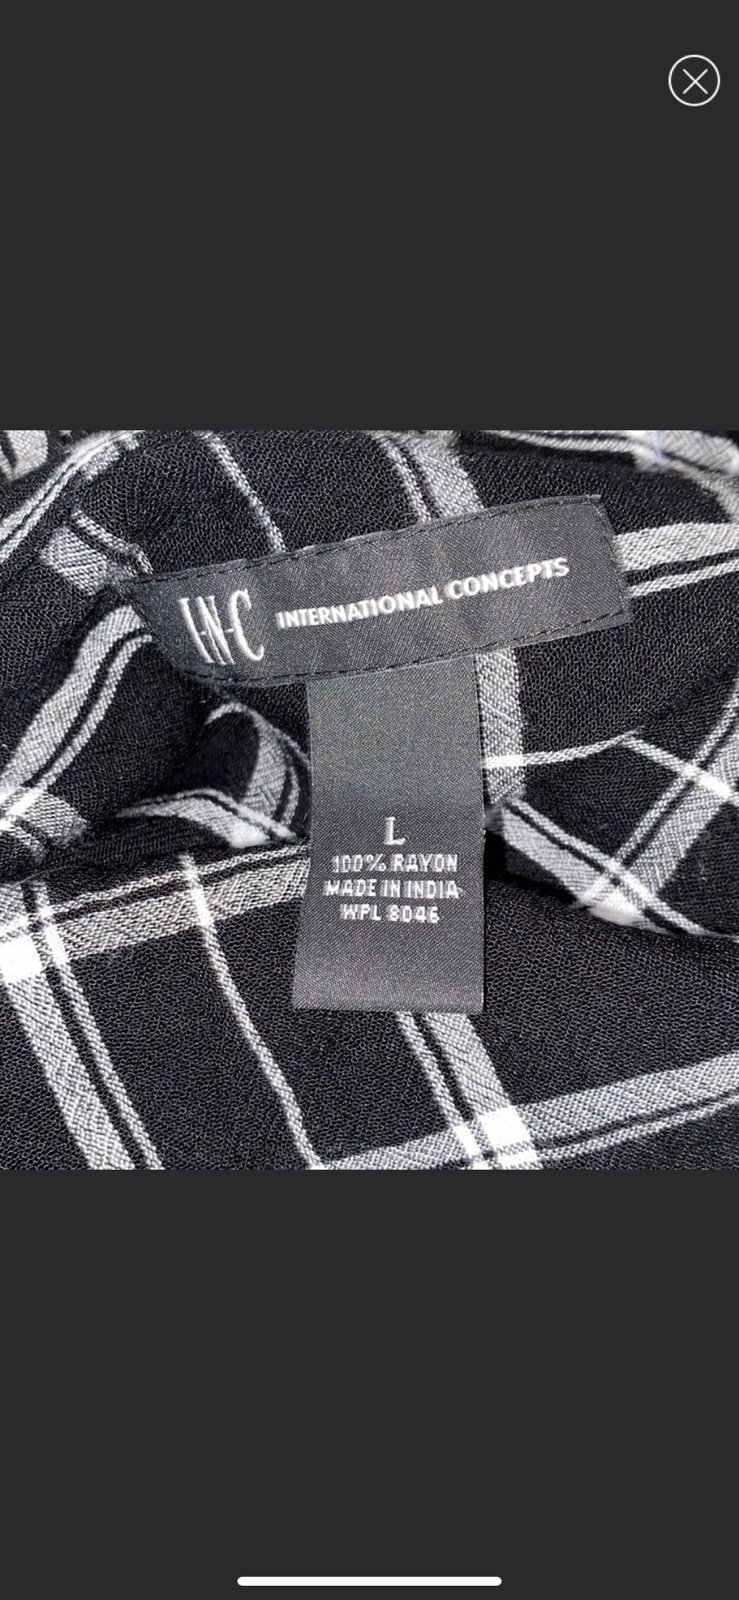 large discount INC International Concepts snap button western black & white top size large pDO05vdgm for sale